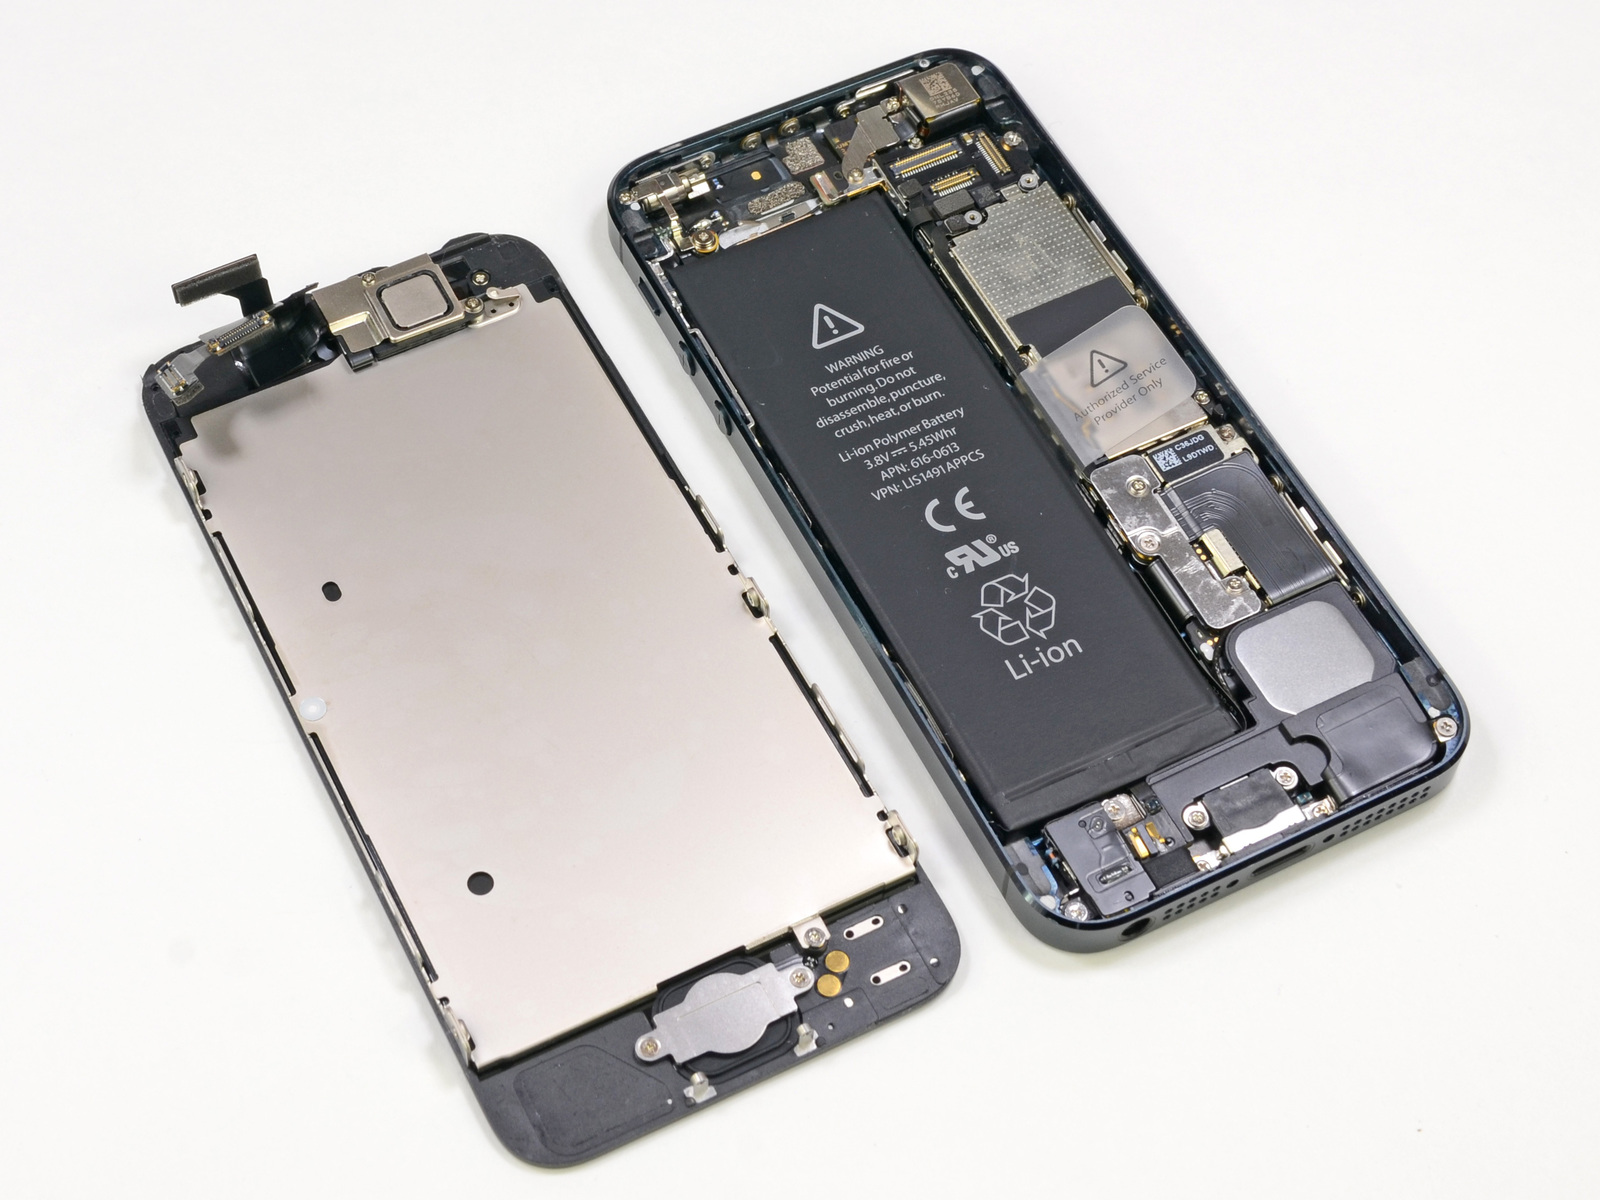 NYTimes.com and analysts explain confusion over alleged cut in order for components to manufacture iPhones 5